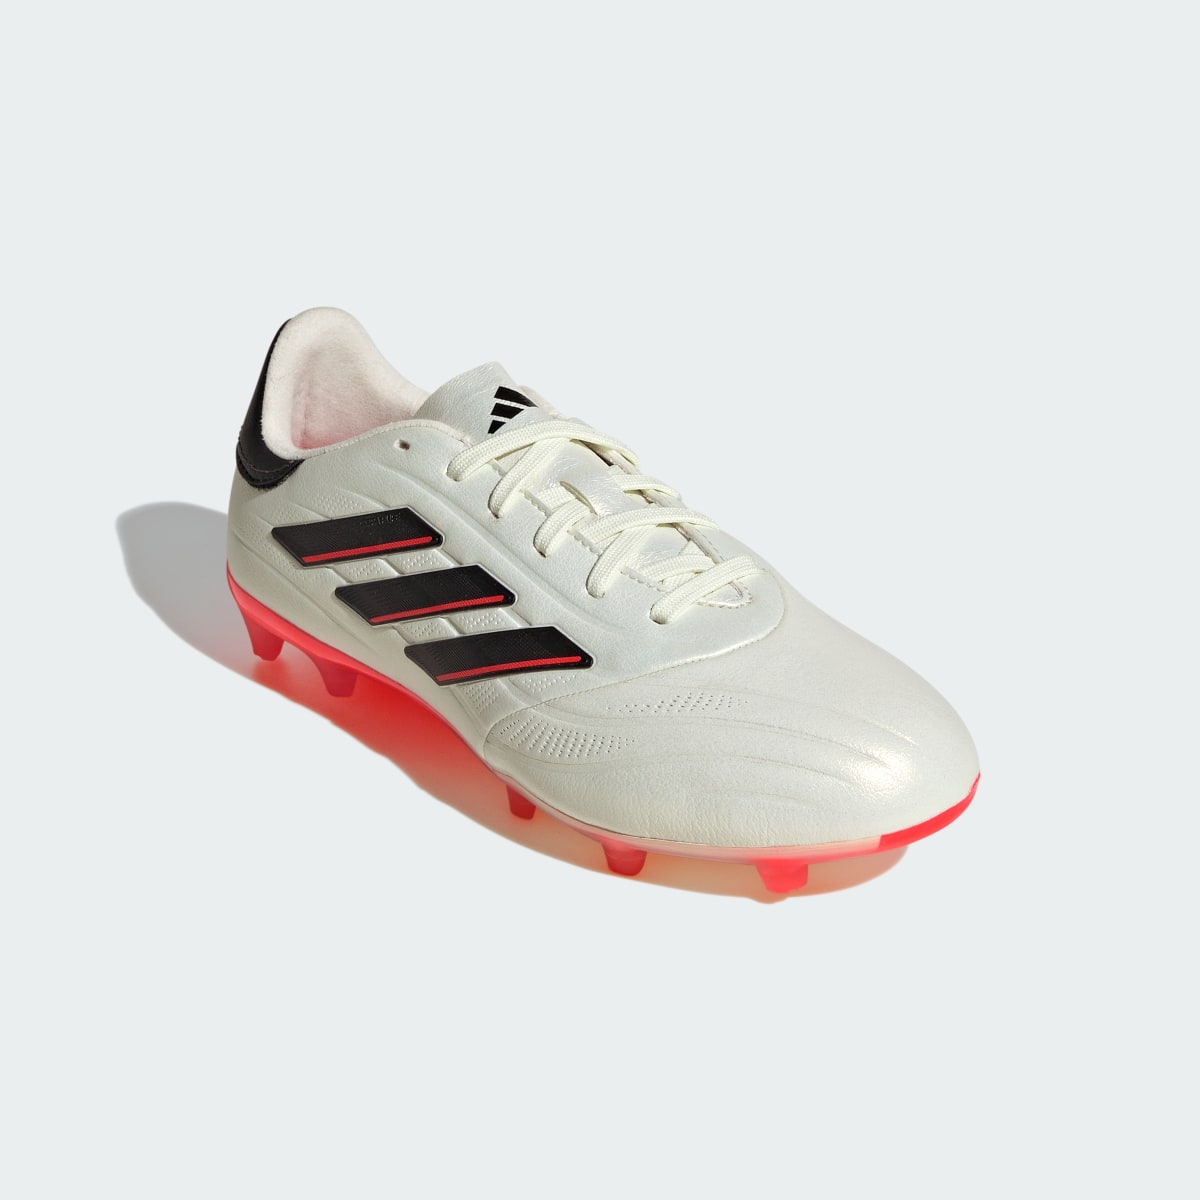 Adidas Copa Pure II Elite Firm Ground Cleats. 5